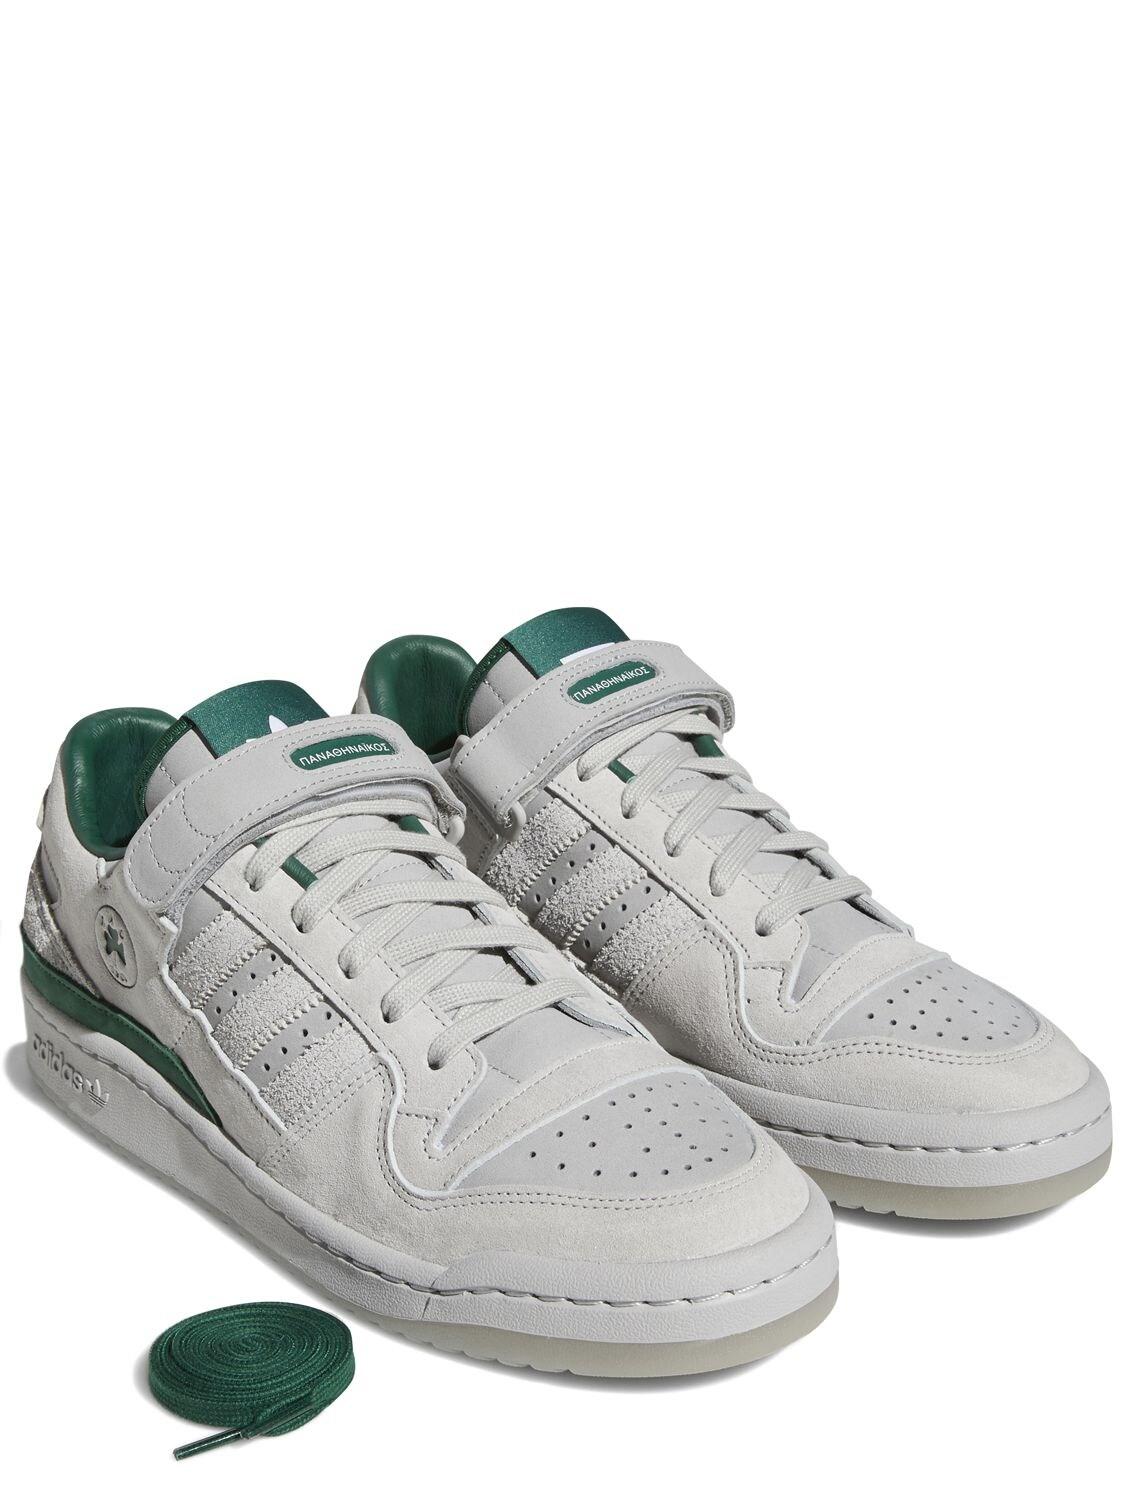 adidas Originals Bstn X Panathinaikos Forum 84 Sneakers in Grey Two (White)  for Men | Lyst